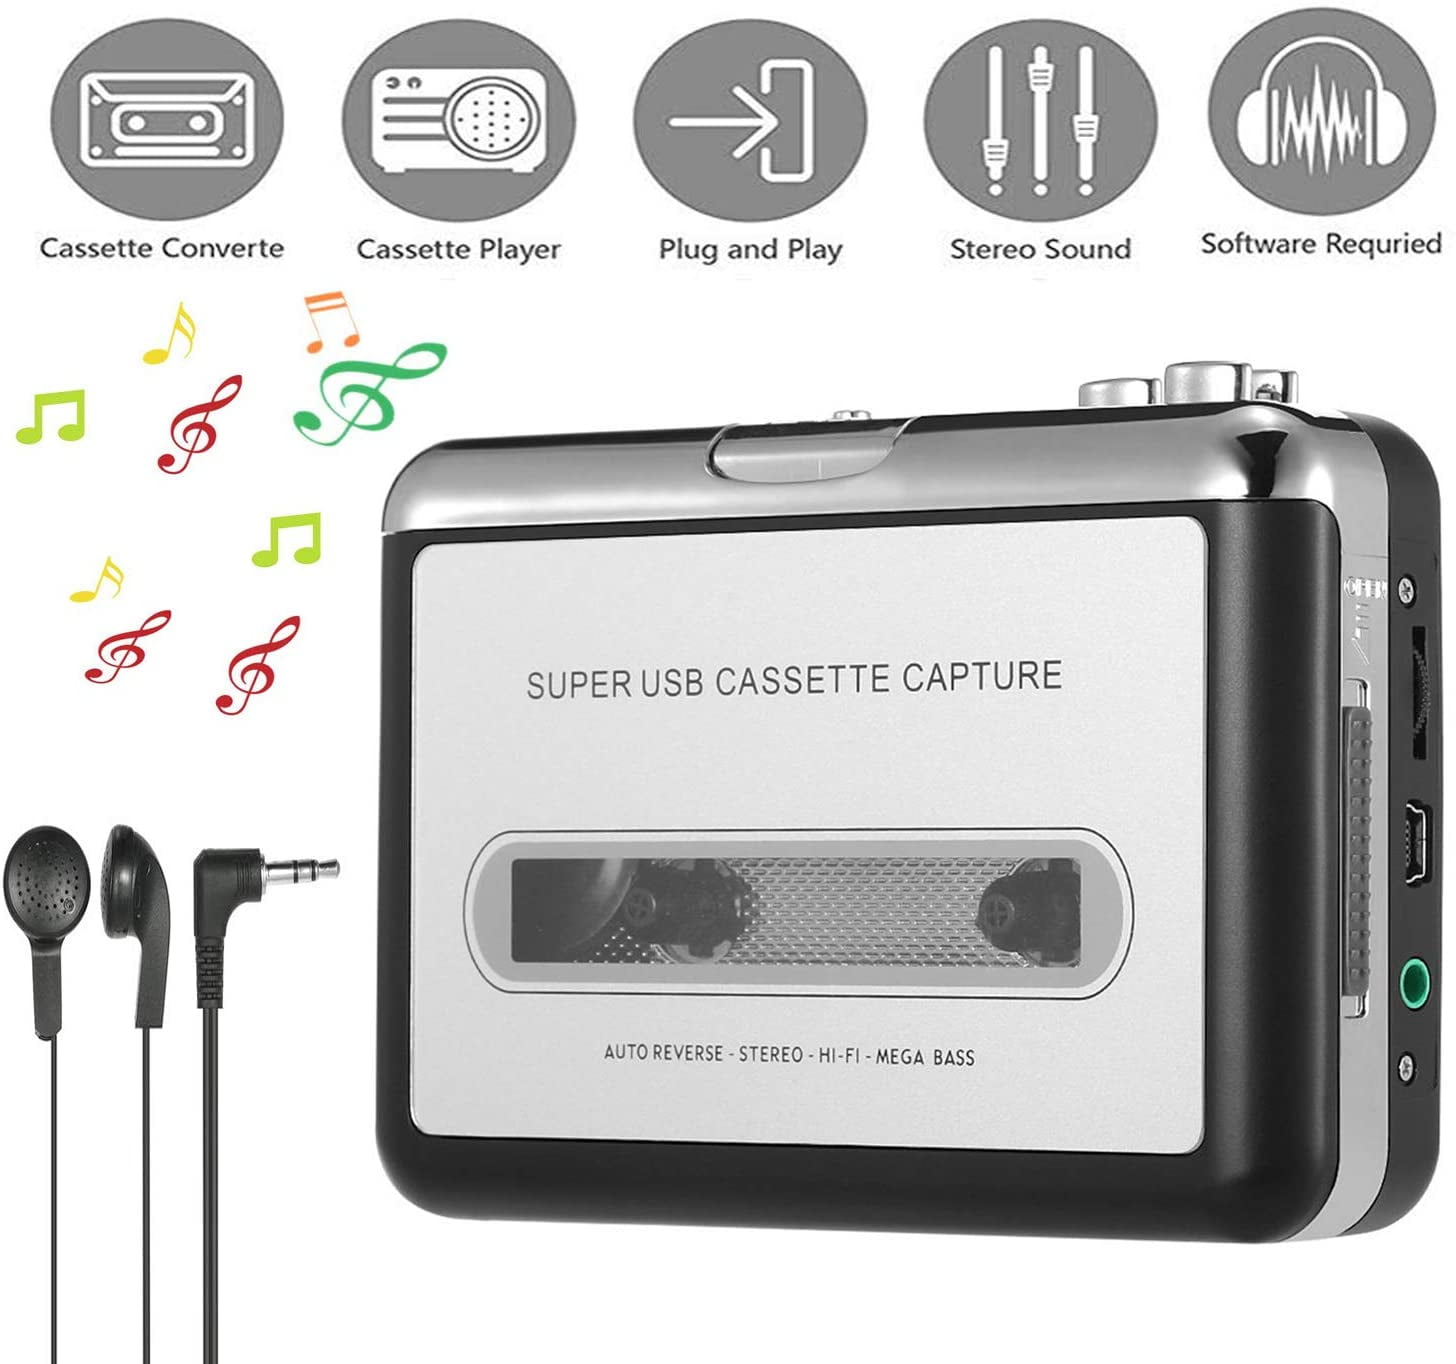 Plug and Play Cassette to MP3 Player Portable USB Cassette Capture for Windows XP/Vista/Windows 7/8 System Tape to MP3 Converter